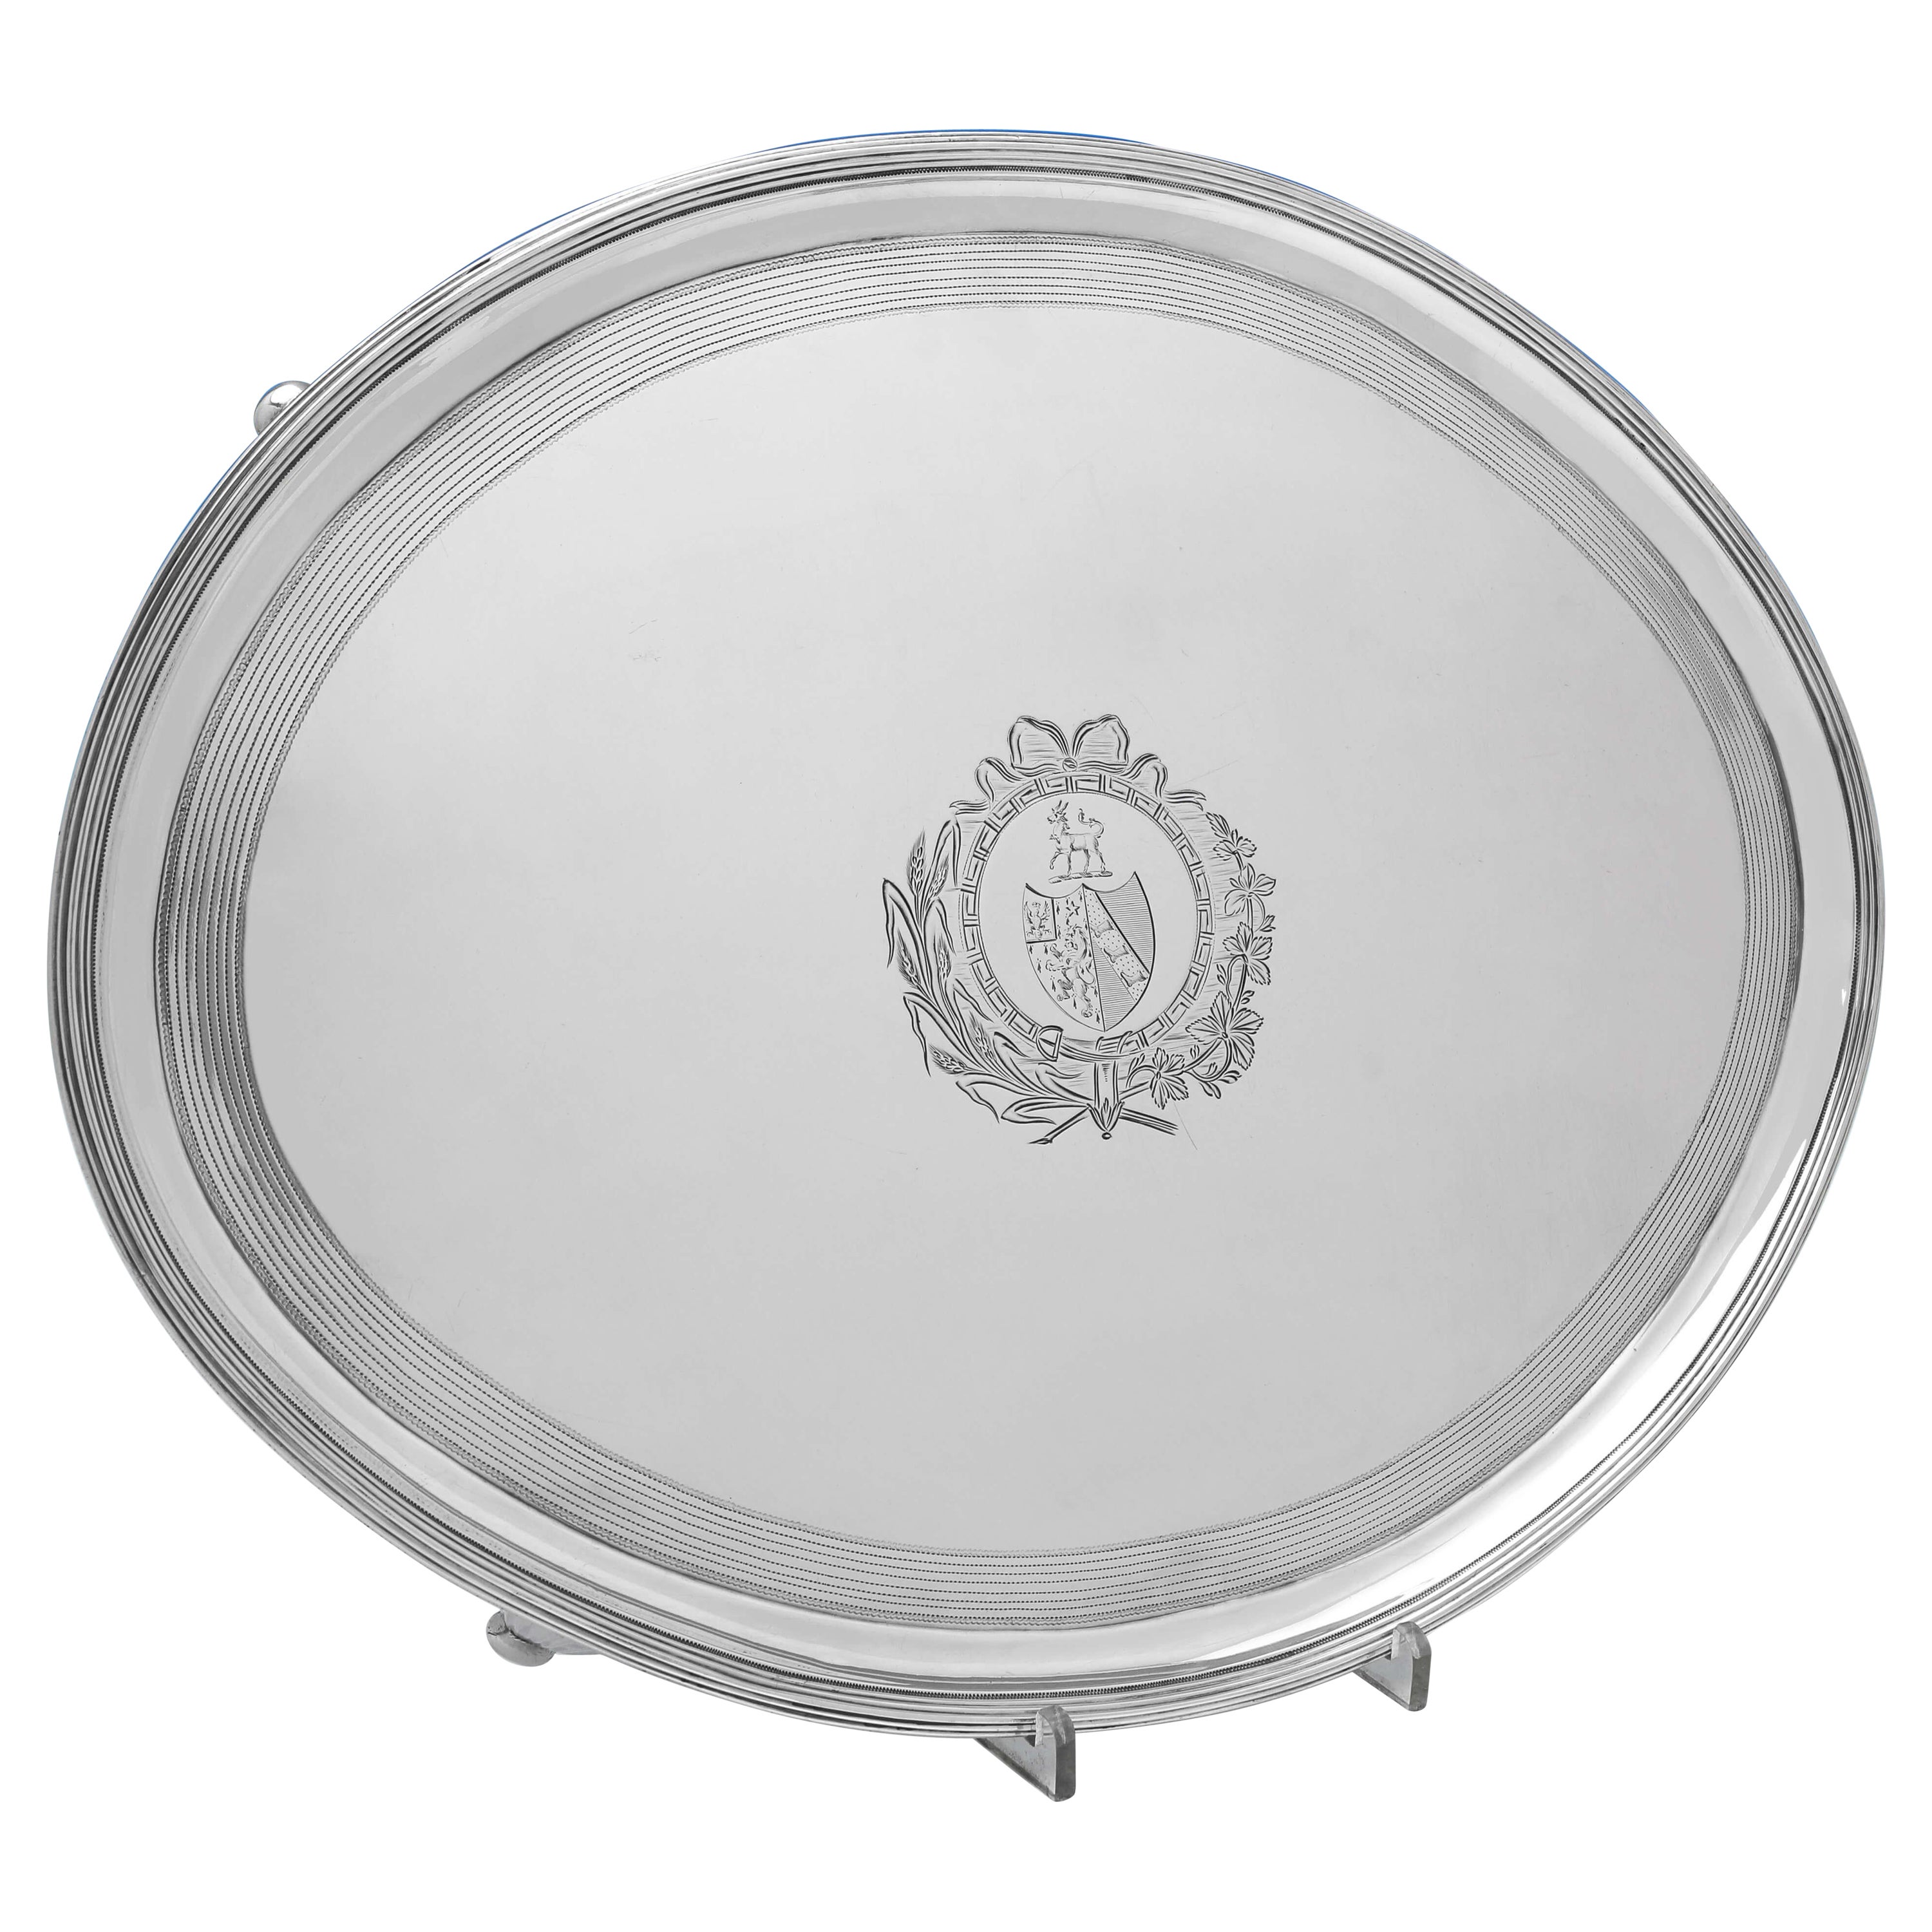 Neoclassical George III Period Antique Sterling Silver Salver - London 1795 For Sale